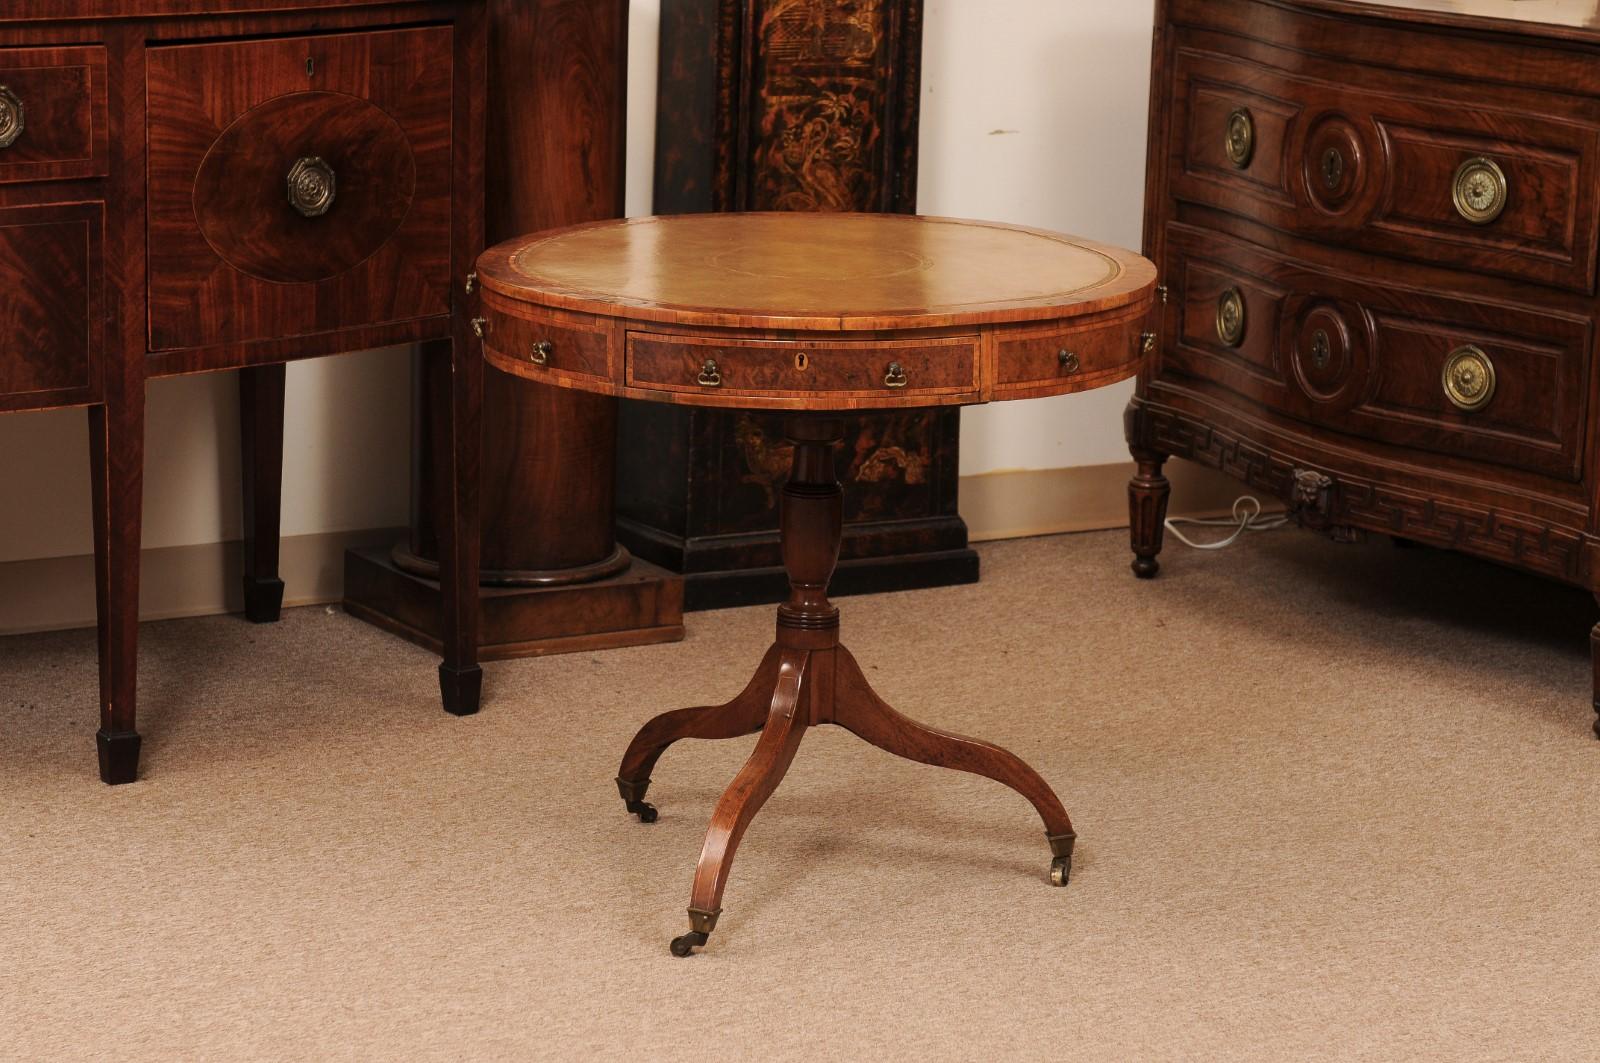 18th Century English Small Mulberry Drum Table with Inlay & Leather Top For Sale 8